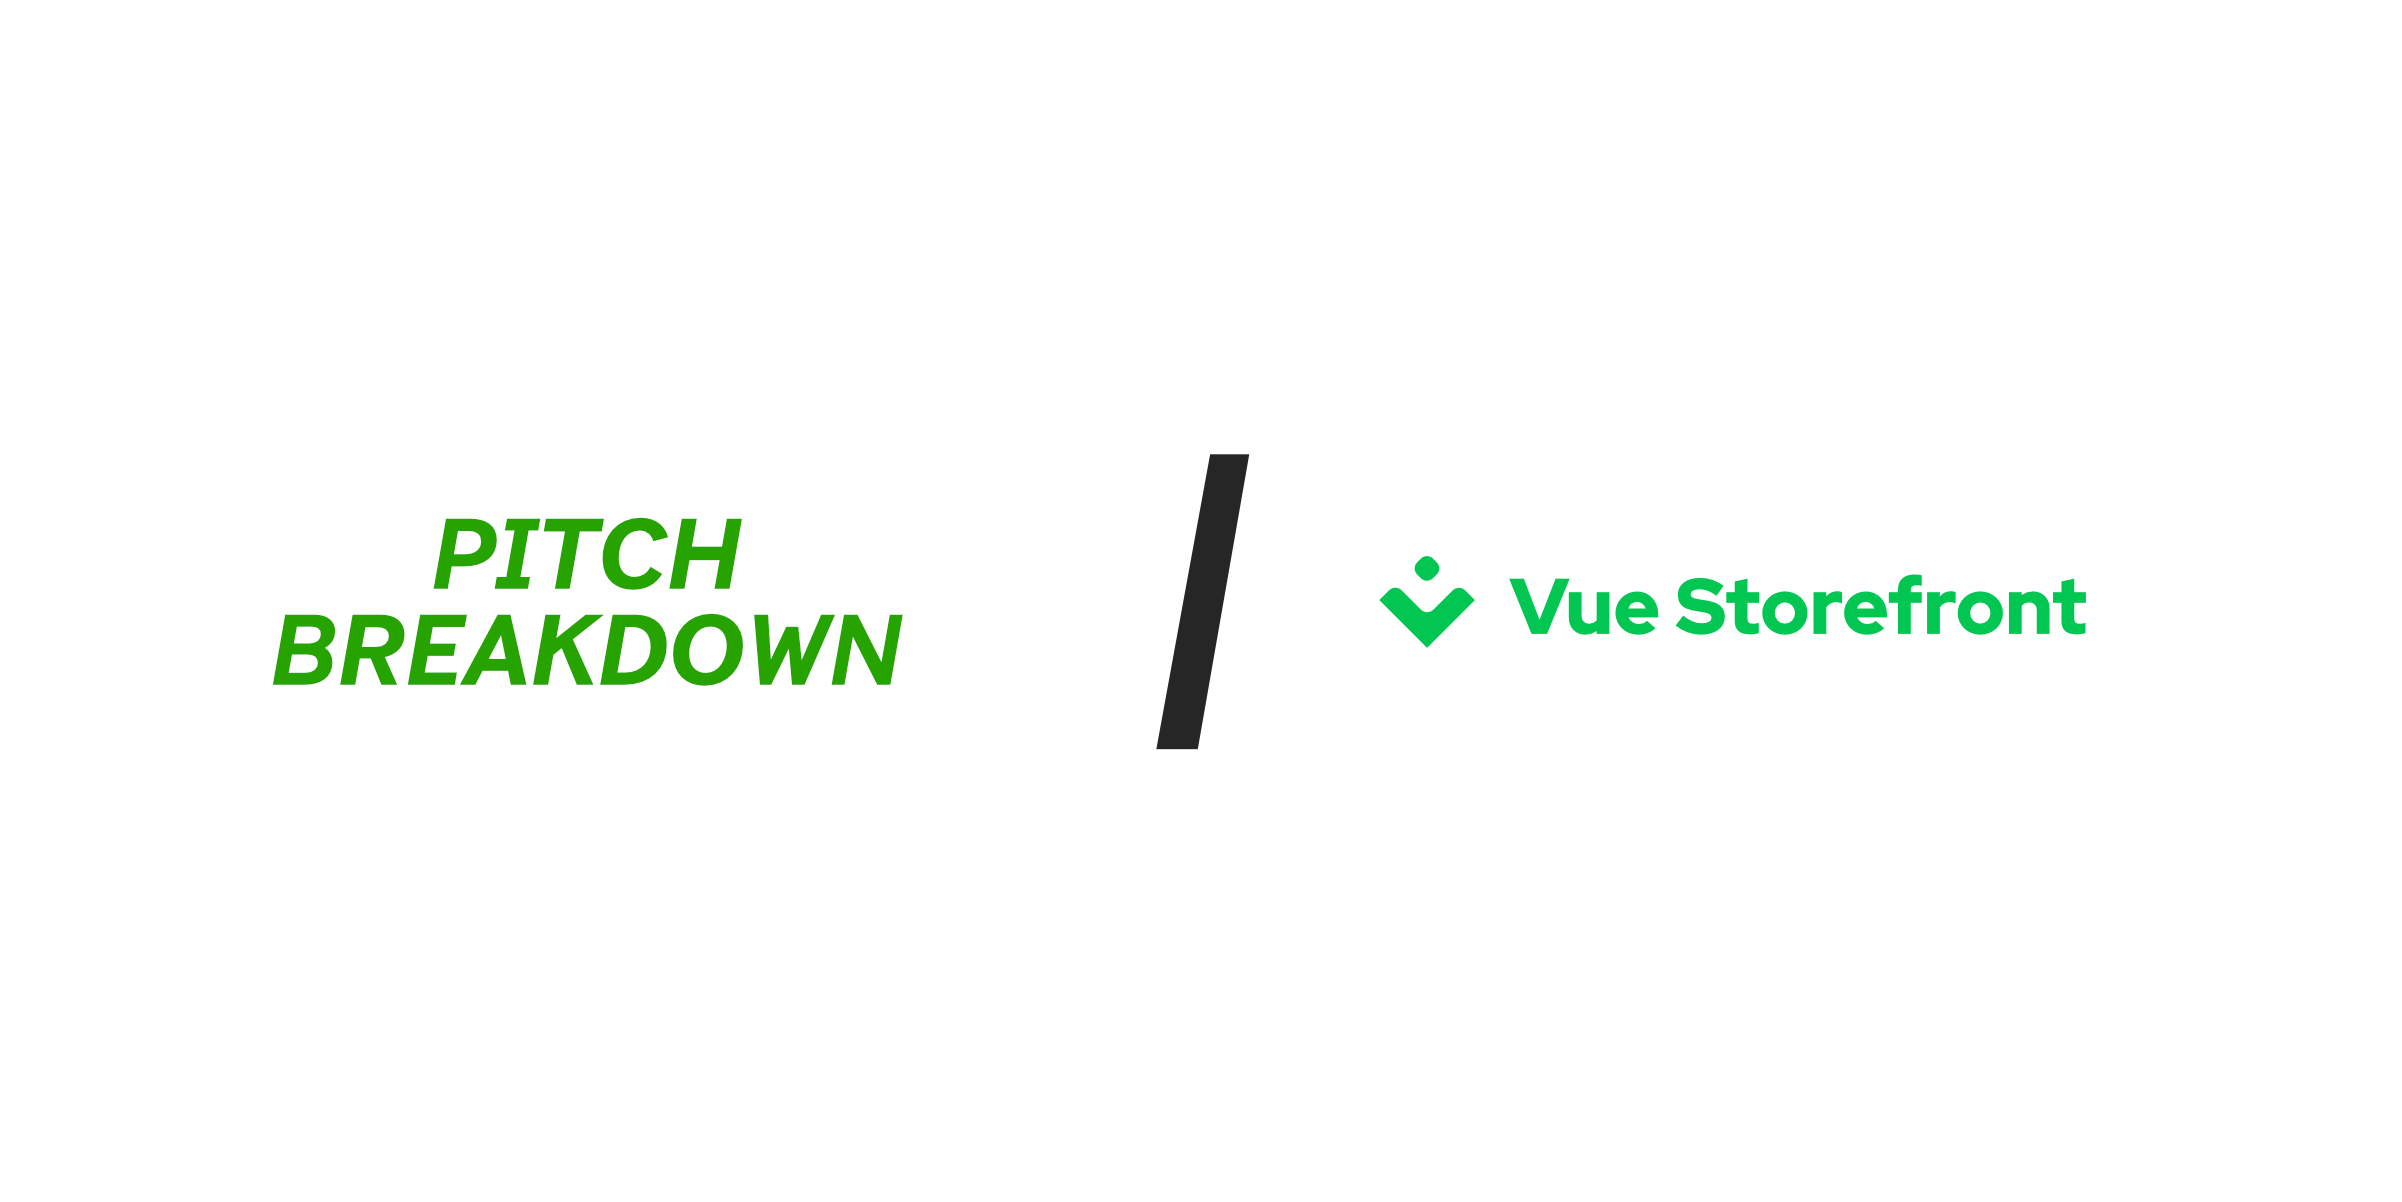 A Breakdown of Vue Storefront's E-Commerce Pitch Deck